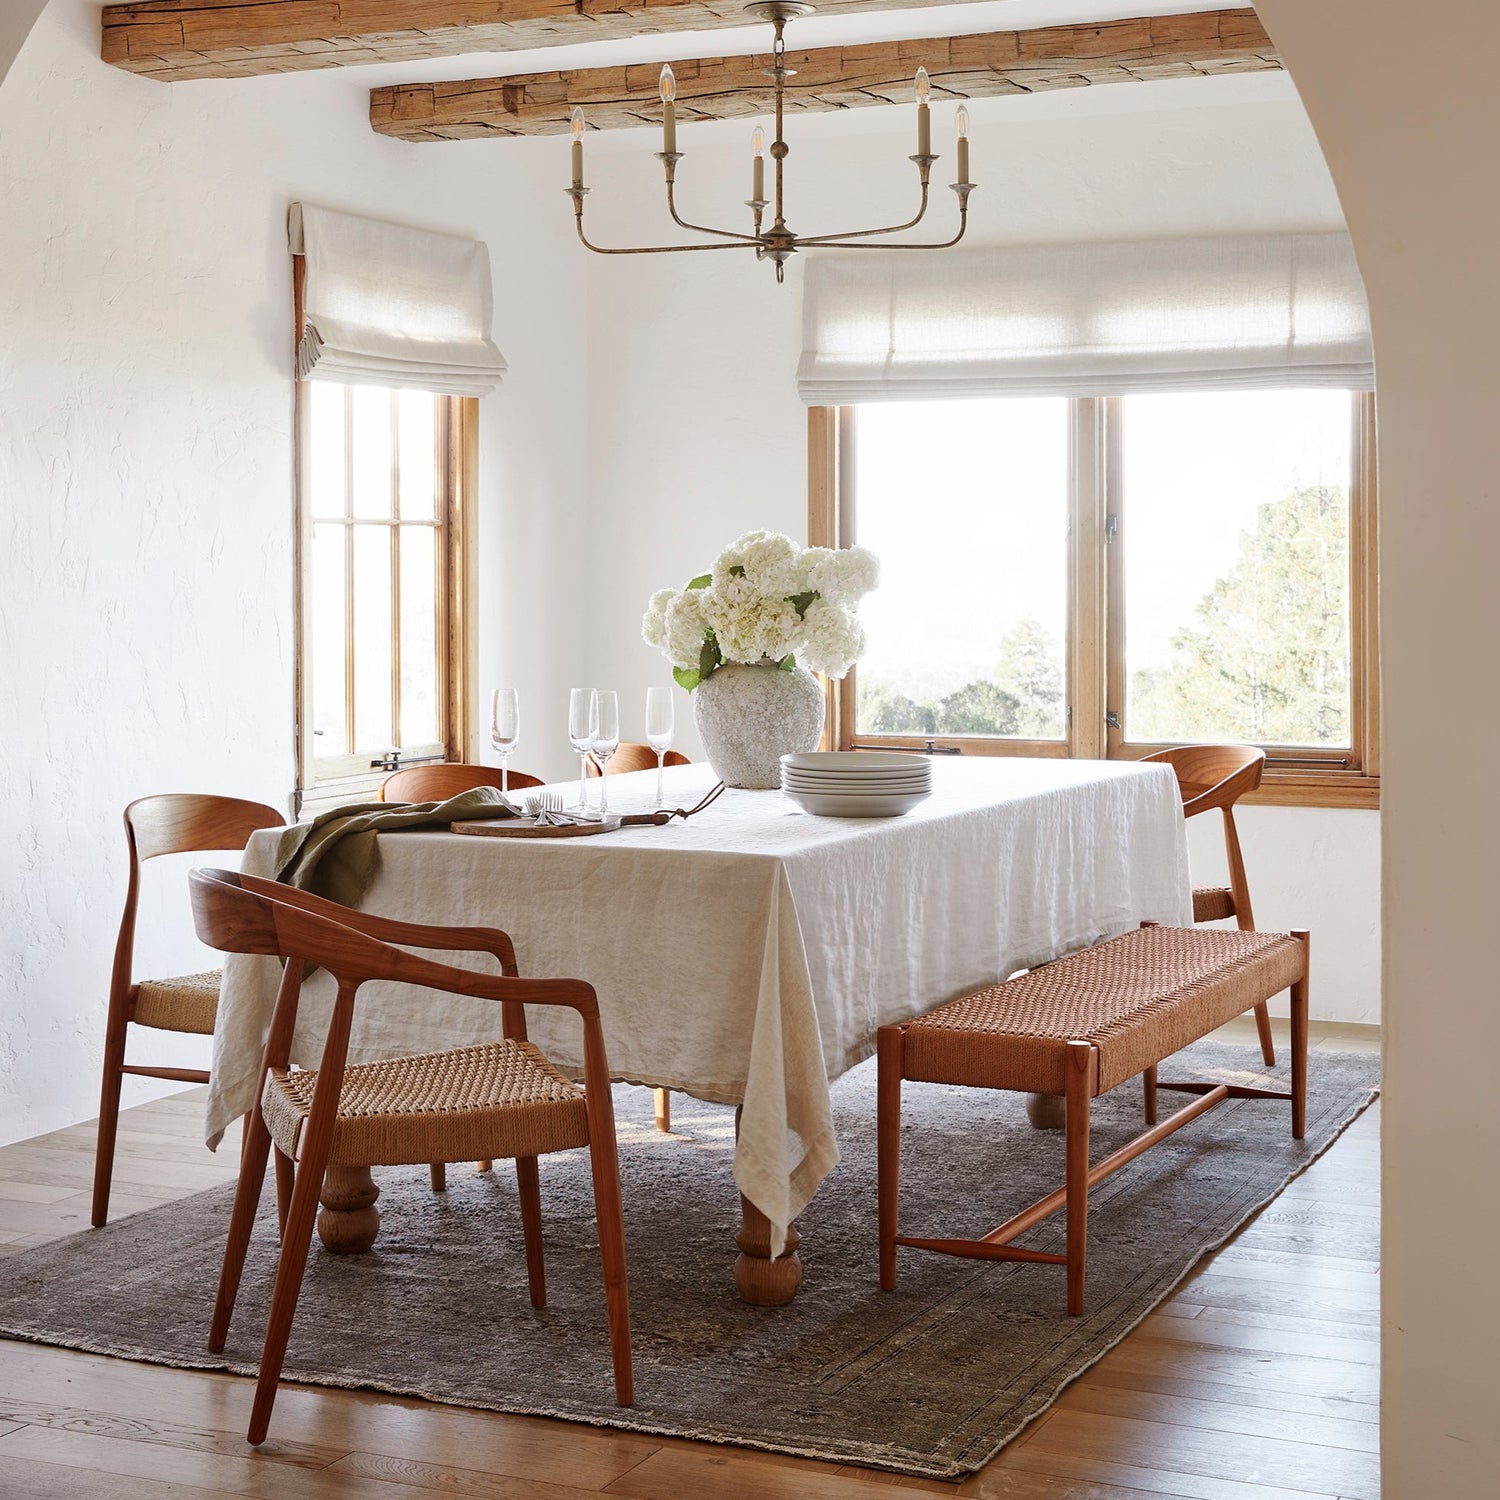 ingrid woven arm chairs in oak at dining table